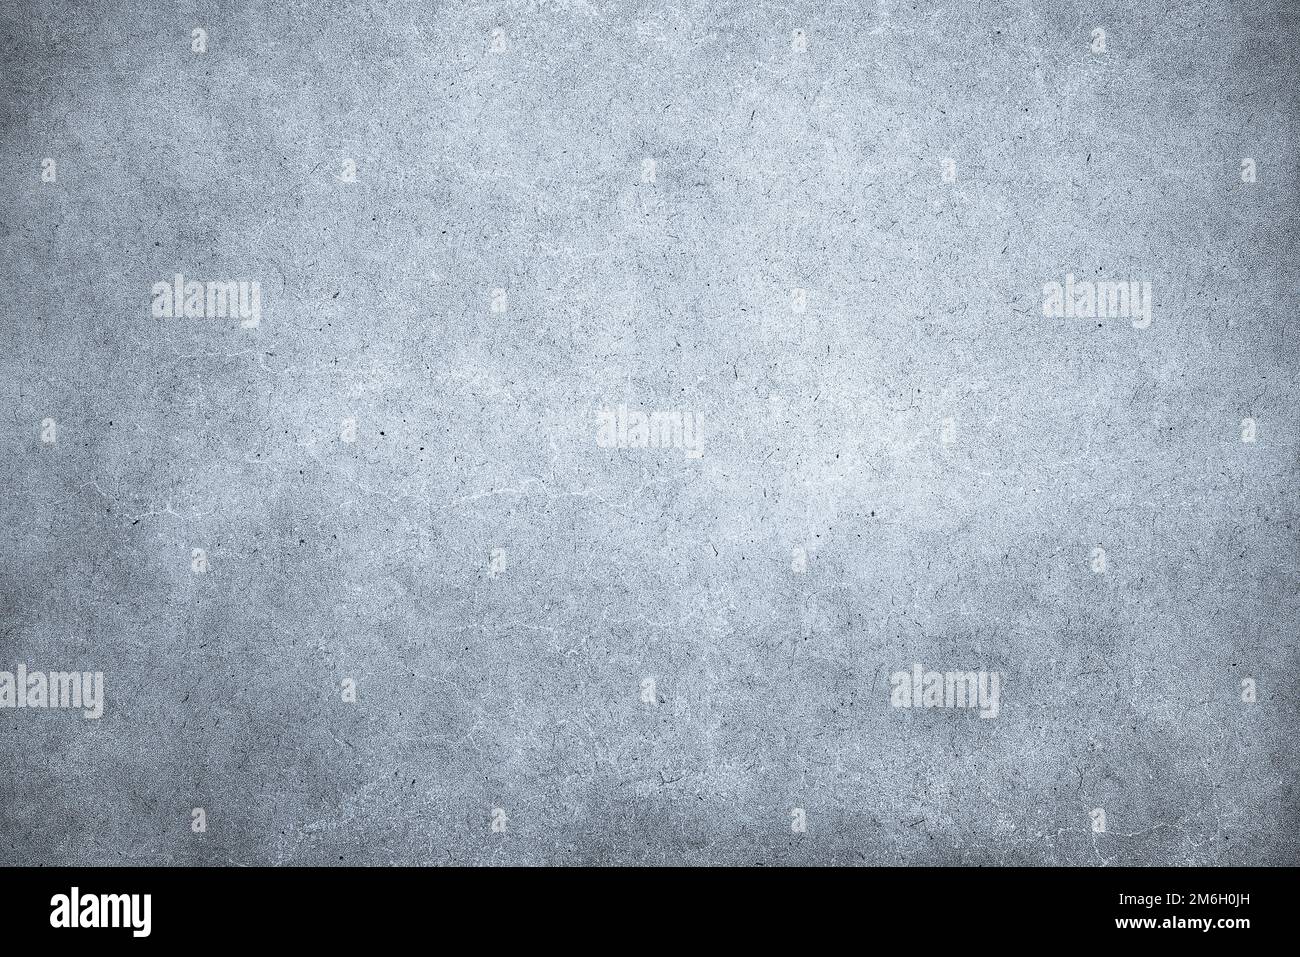 Grunge background with space for text or image Stock Photo